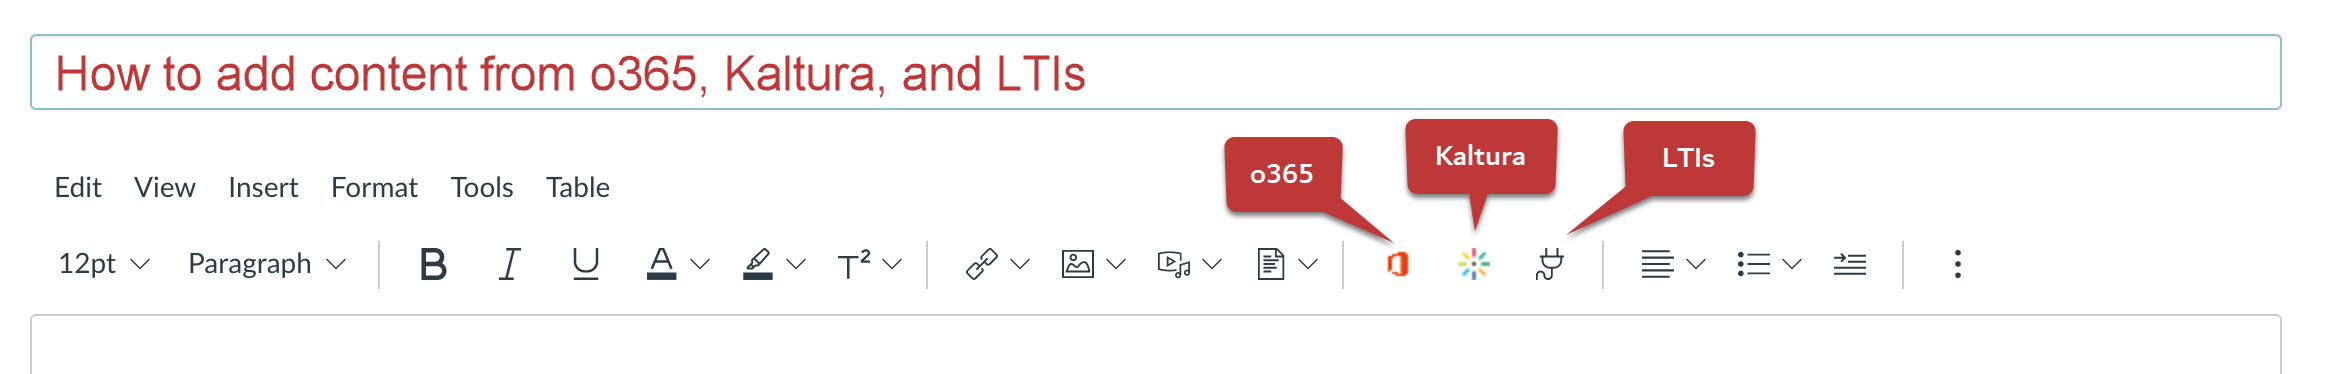 RCE menu bar with highlights calling out the o365, Klatura, and LTI buttons